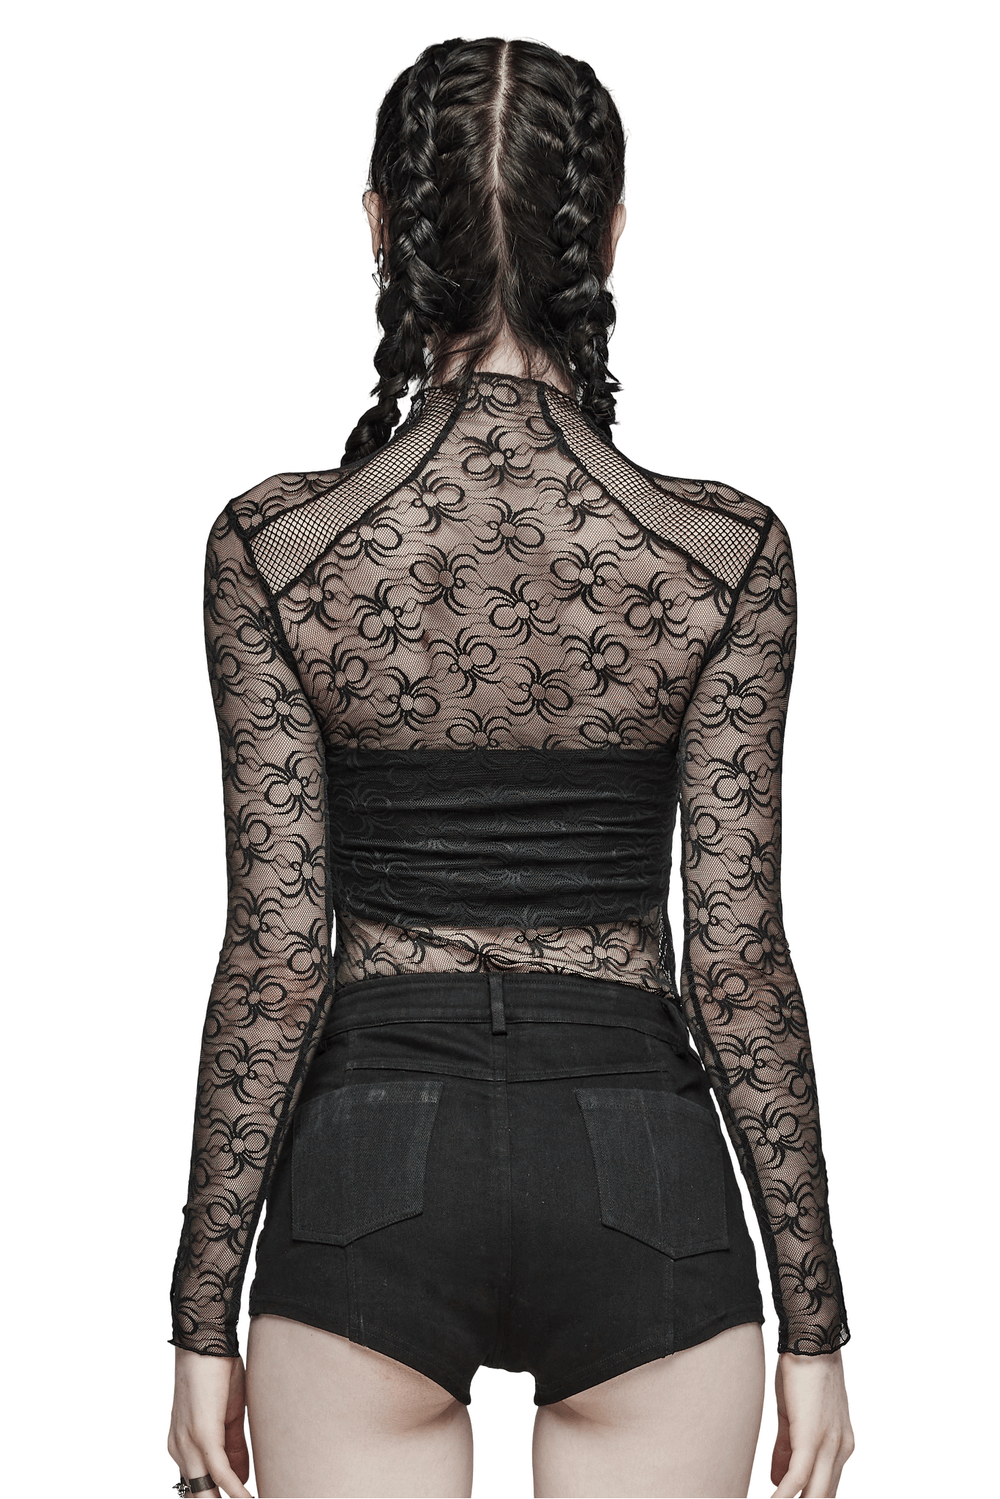 Black Lace Spiderweb Long Sleeves Cyber Punk Top